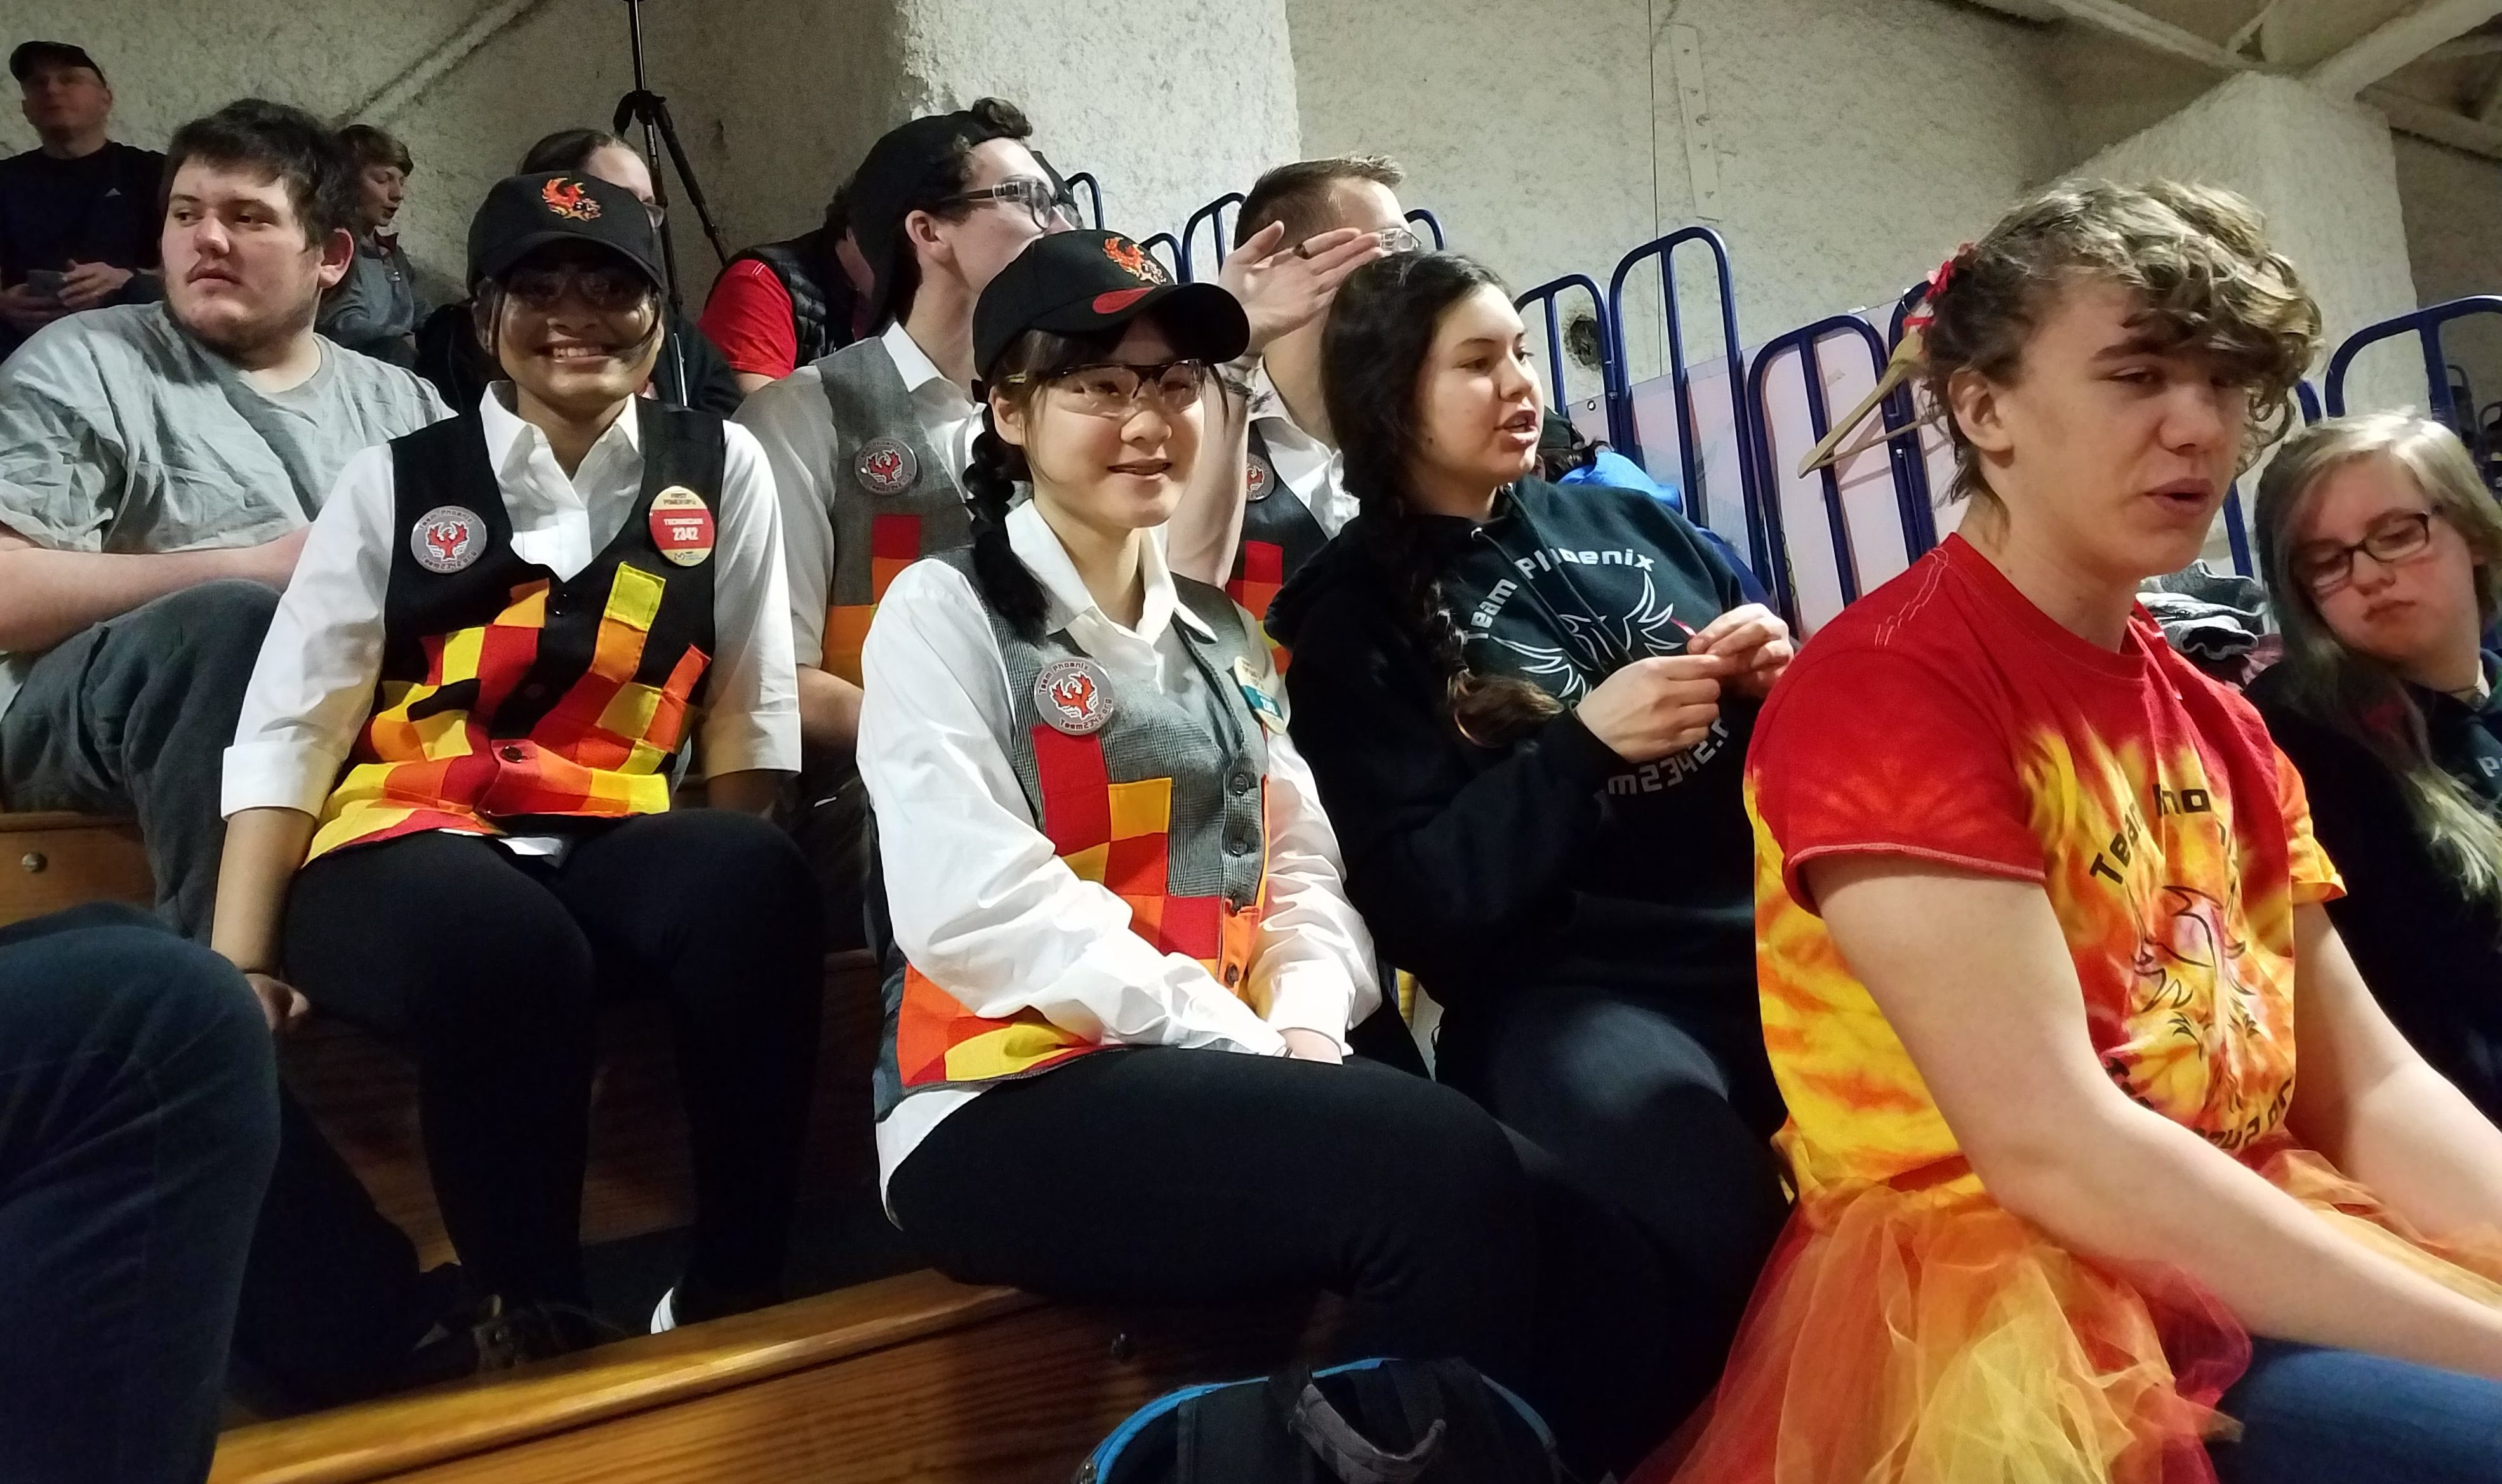 The cheering section - Greater Boston Event 2018